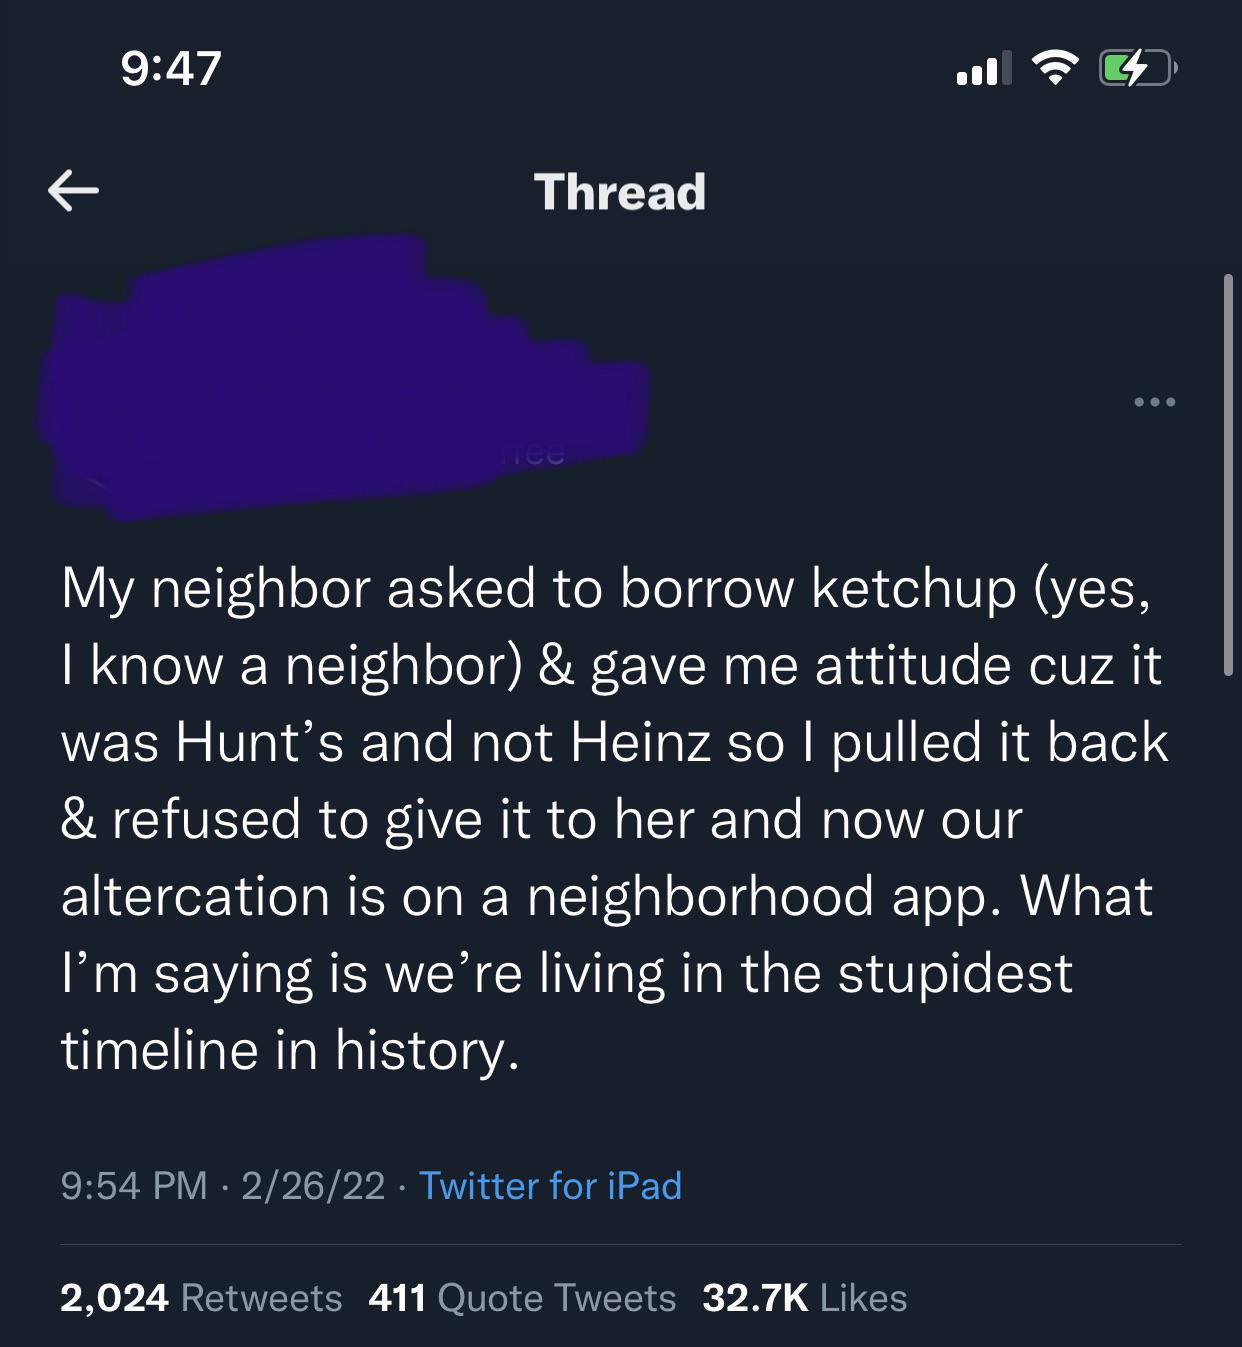 entitled people getting owned - Ketchup - Thread 22622 Twitter for iPad . My neighbor asked to borrow ketchup yes, I know a neighbor & gave me attitude cuz it was Hunt's and not Heinz so I pulled it back & refused to give it to her and now our altercation